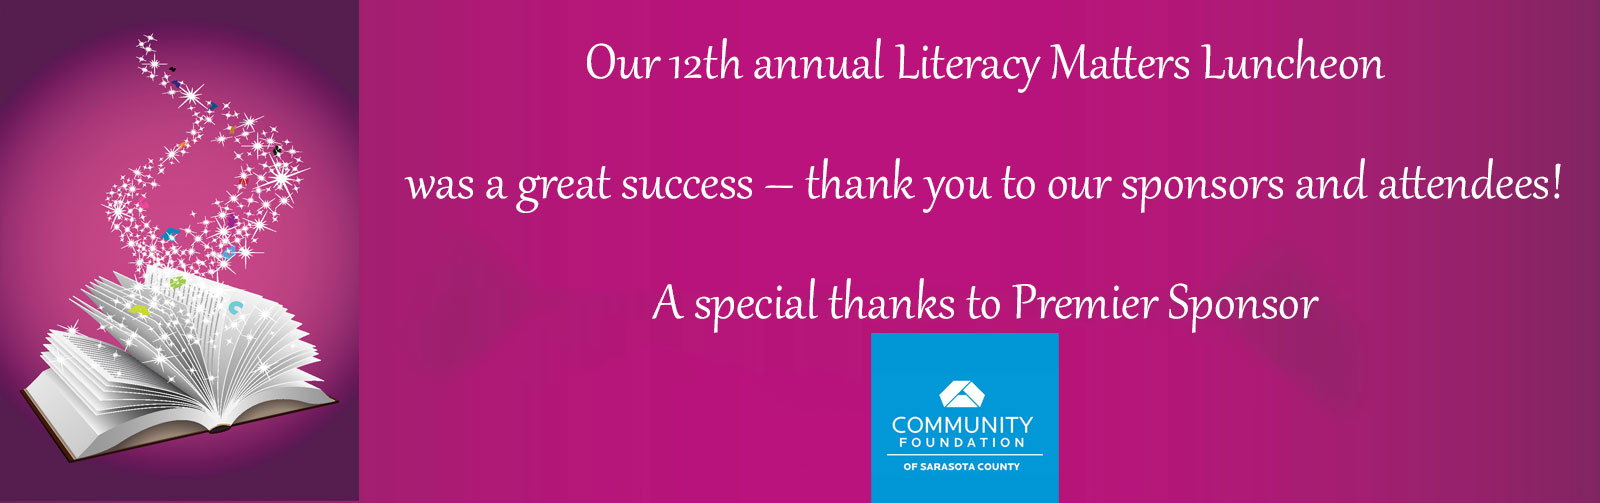 Literacy Council Of Sarasota 2019 Annual Luncheon Literacy Council Of